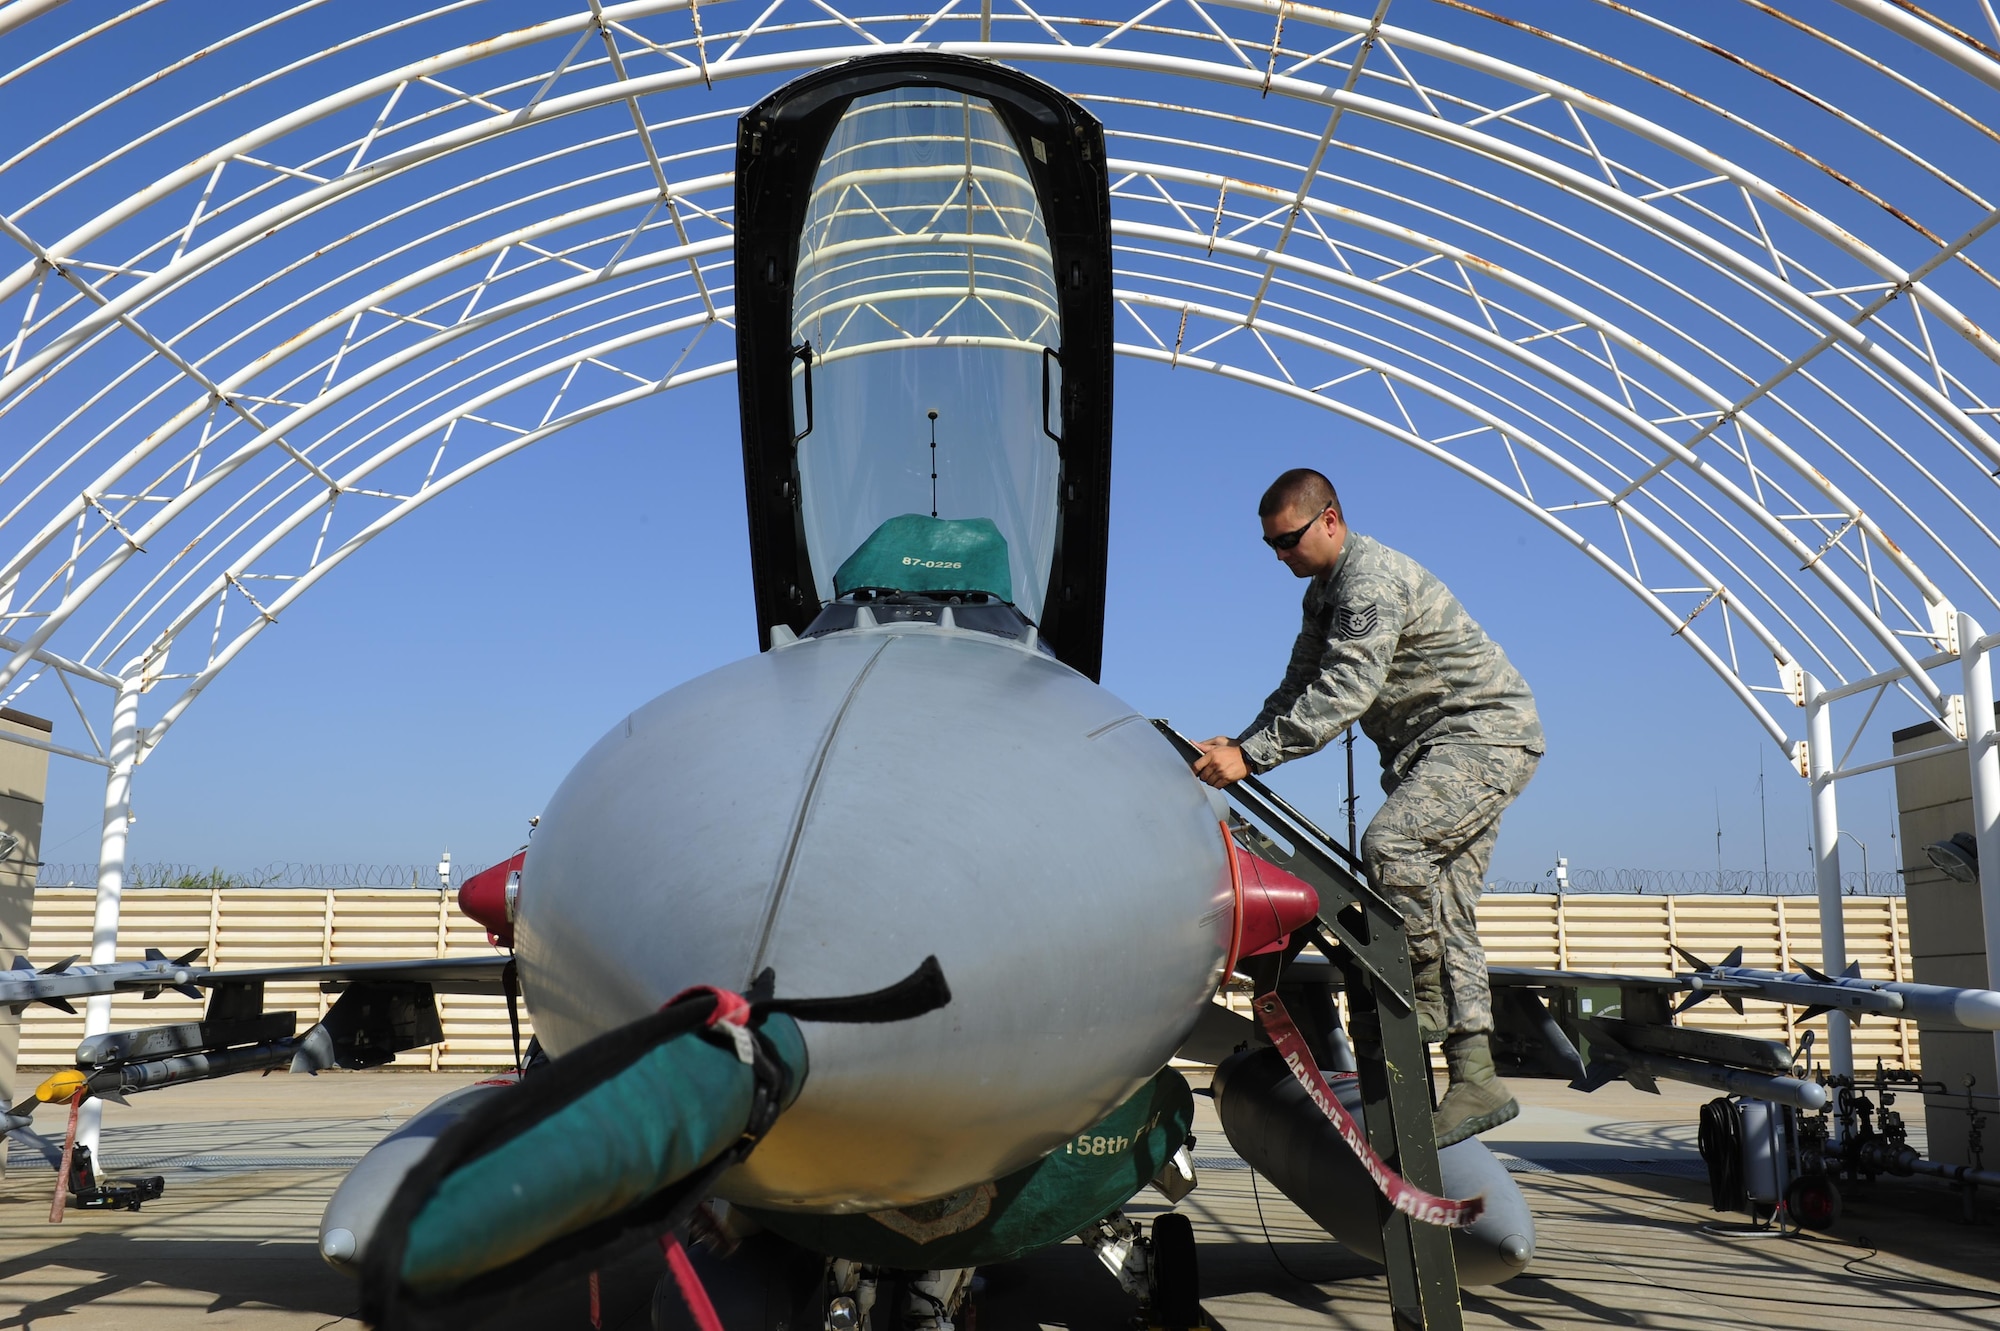 U.S. Air Force Tech. Sgt. Brett Larson, 134th Expeditionary Fighter Squadron F-16 Fighting Falcon crew chief, Vermont Air National Guard, climbs a ladder to inspect the cockpit of an F-16 at Kunsan Air Base, Republic of Korea, Oct. 6, 2015. The 134th EFS was redeployed from Kadena Air Base, Japan to Kunsan AB as part of a theater security package. Movement of TSPs into the Pacific region is a routine and integral part of U.S. Pacific Command’s force posture. (U.S. Air Force photo by Staff Sgt. Nick Wilson/Released)